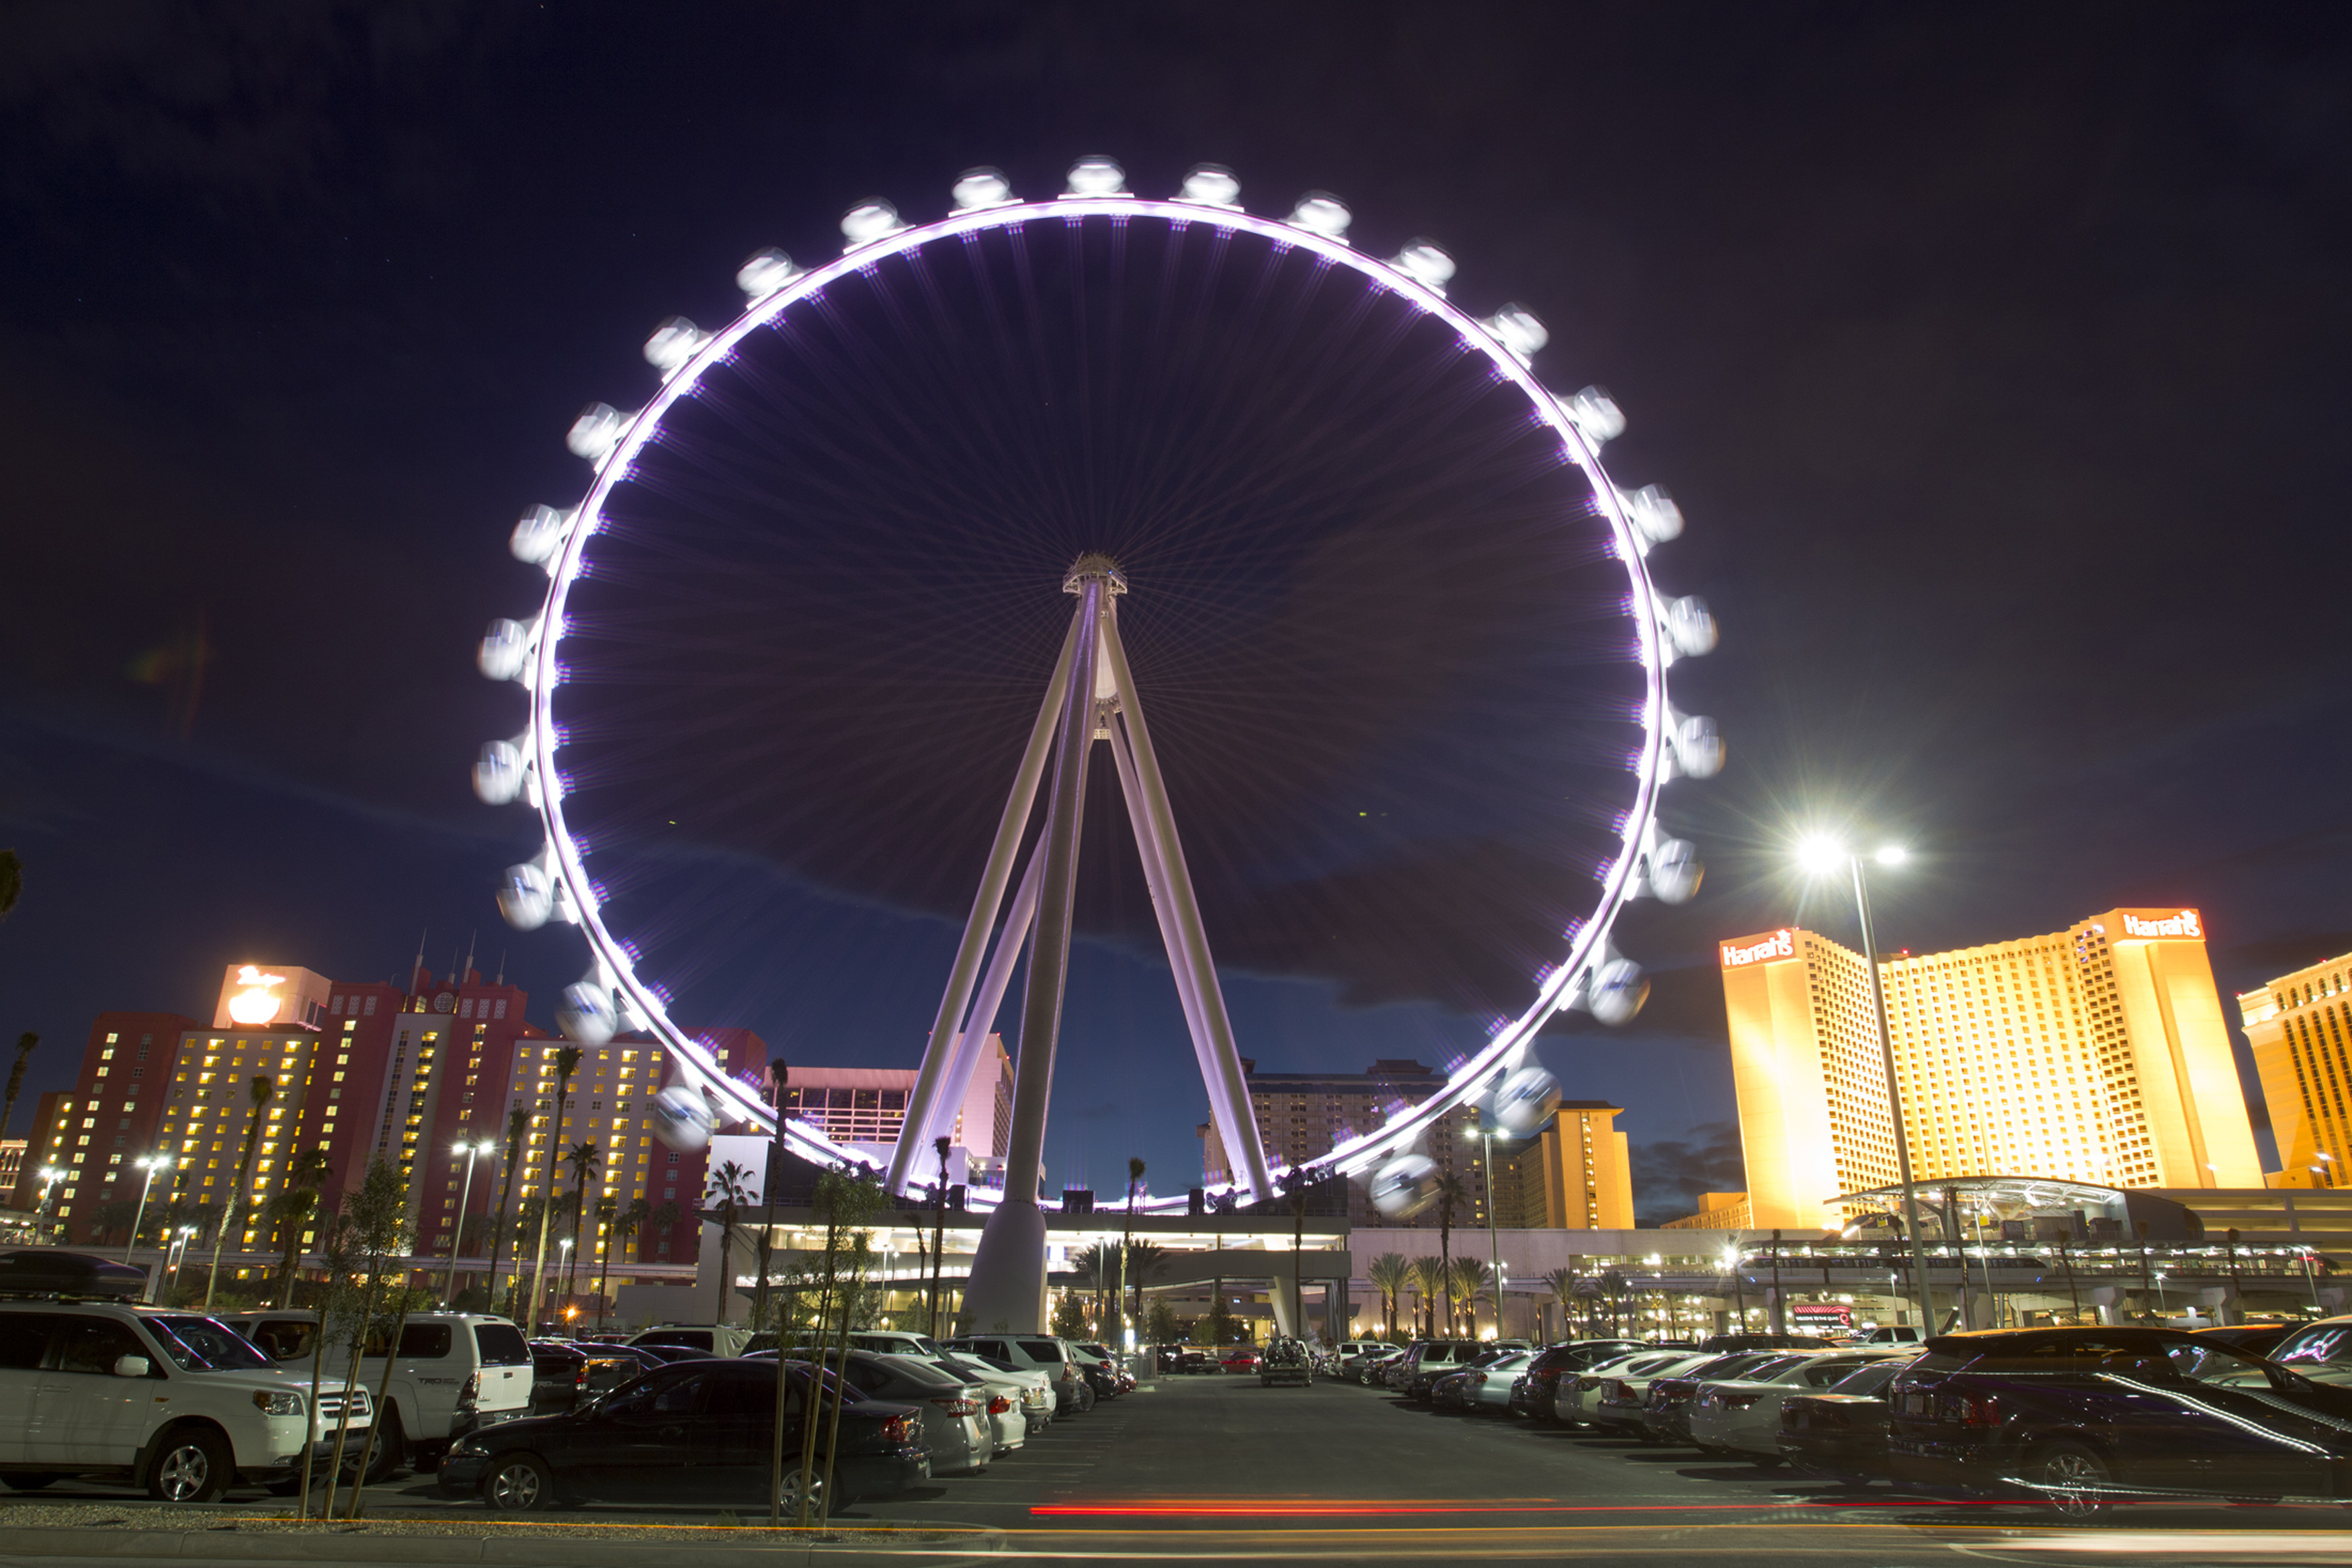 The 550 foot-tall (167.6 m) High Roller observation wheel, the tallest in the world, in seen in Las Vegas